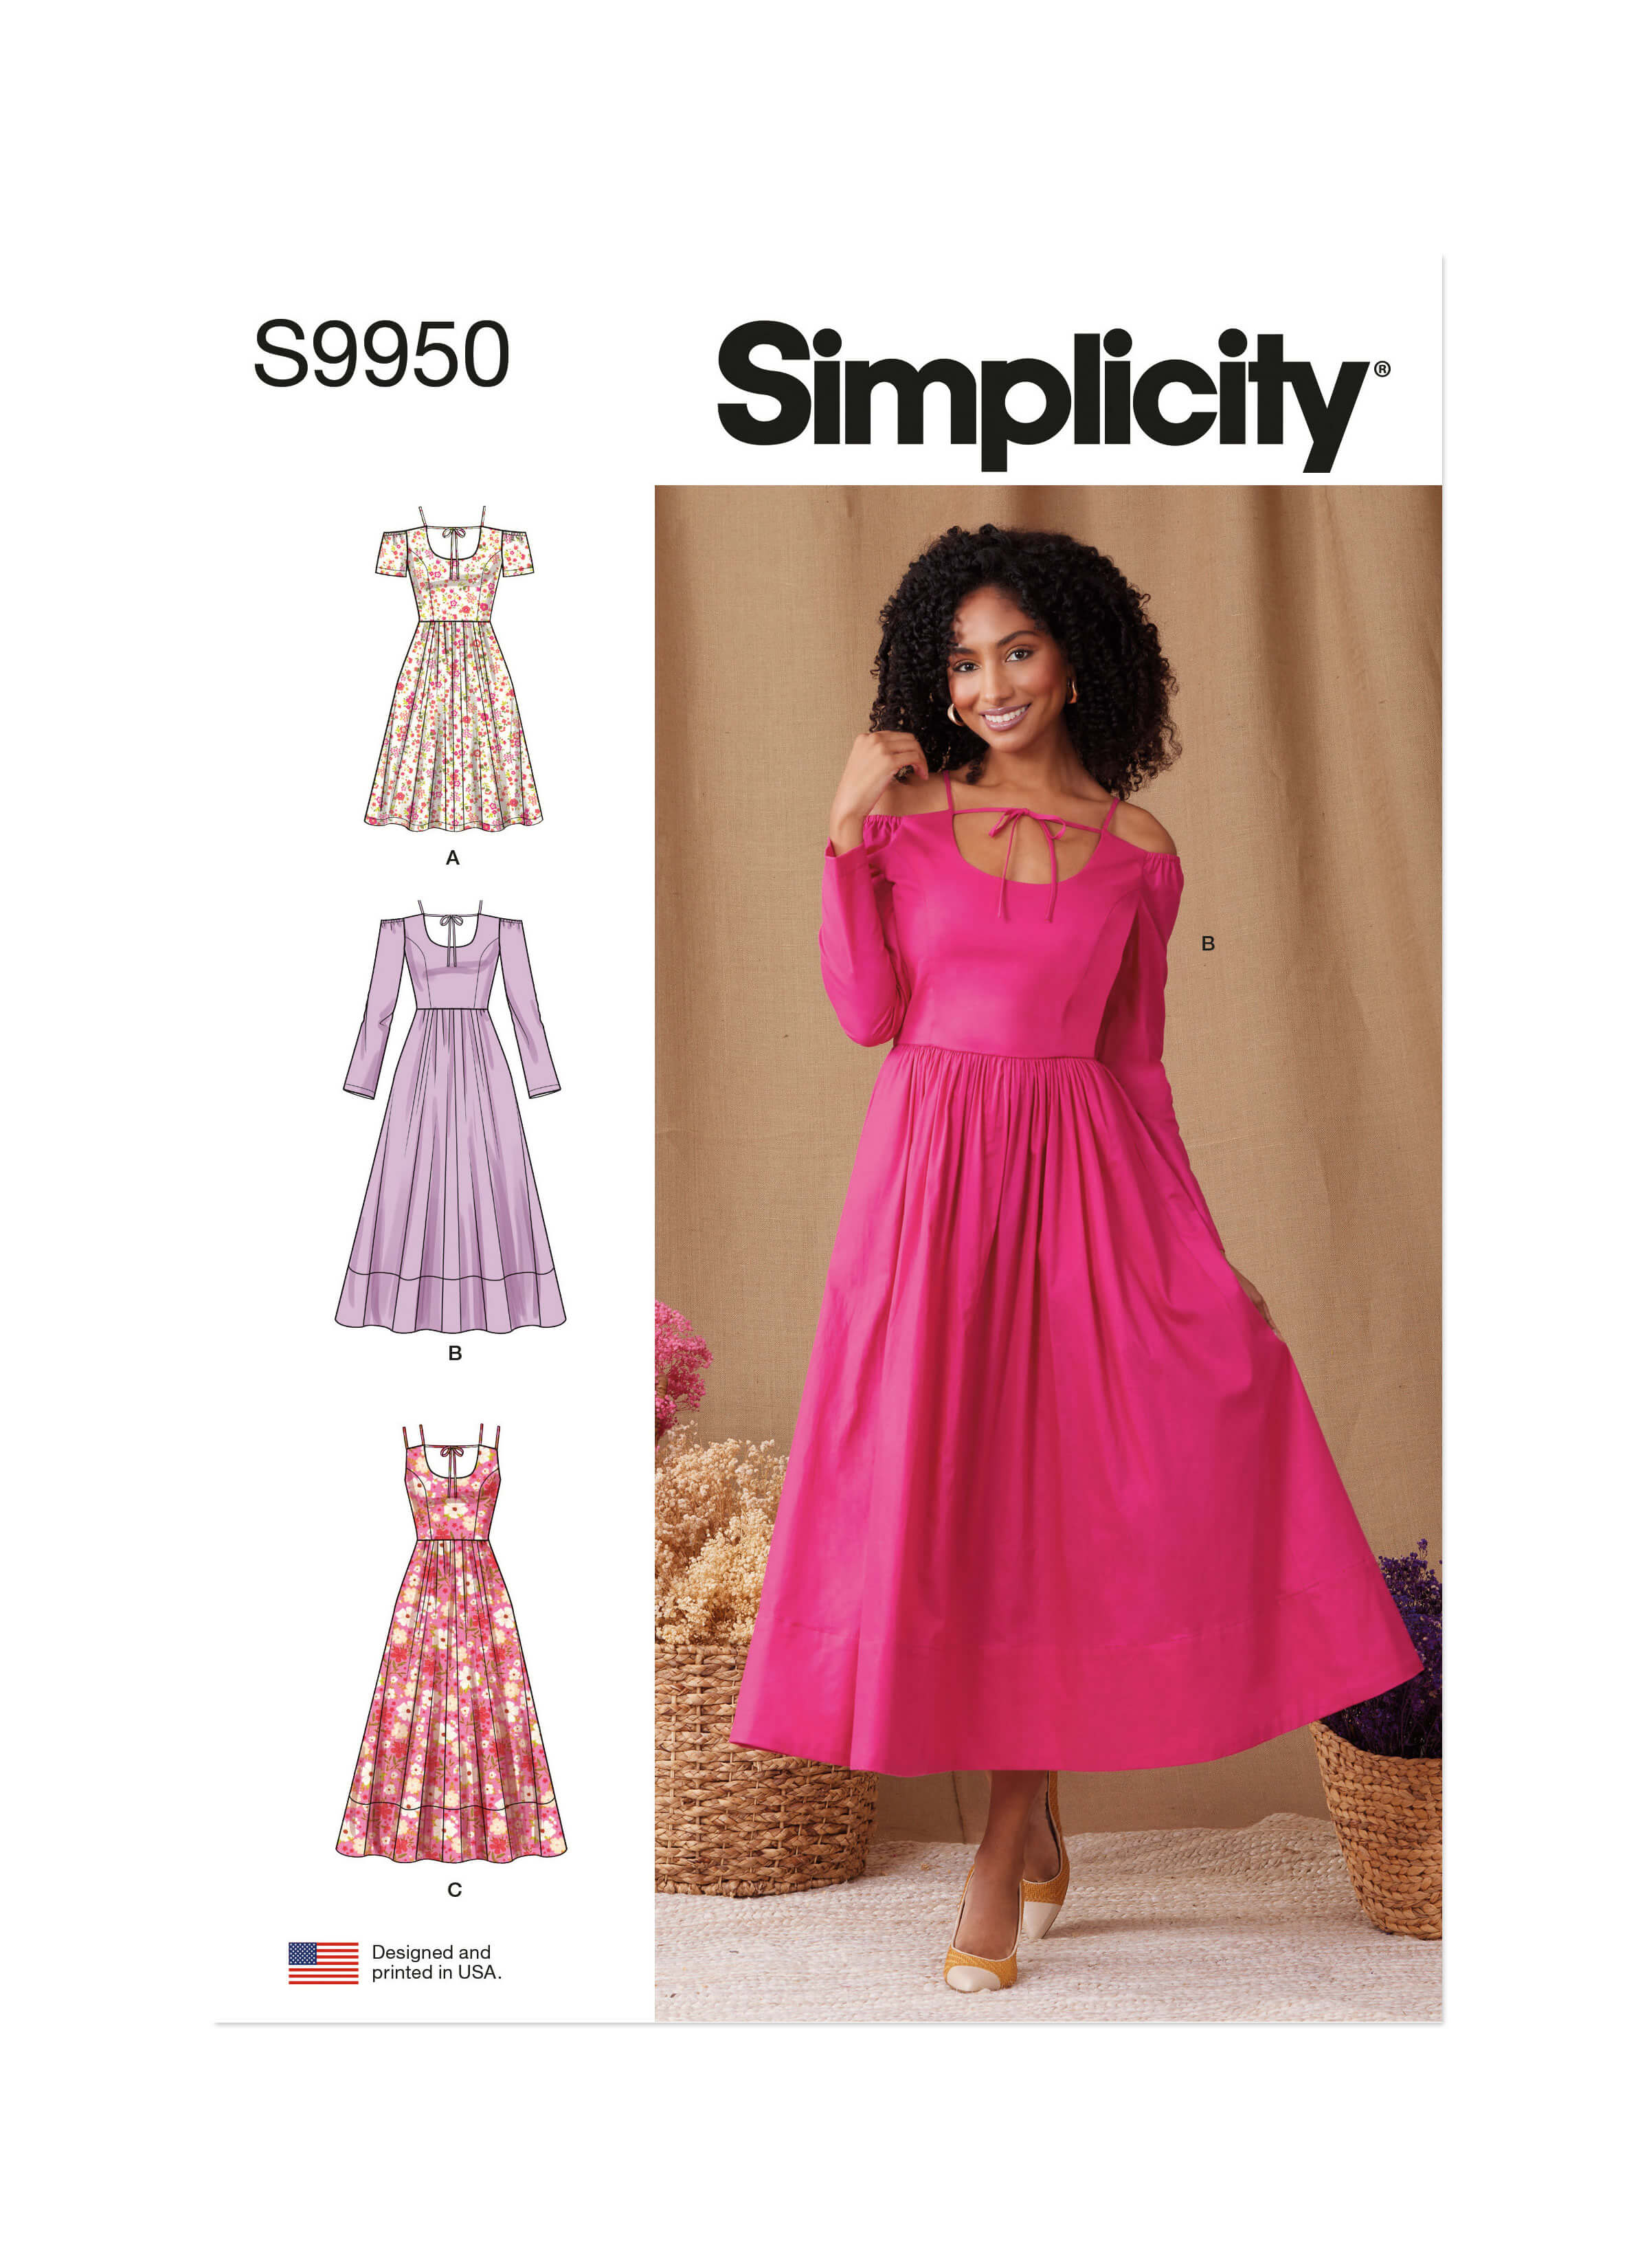 Simplicity Sewing Pattern S9950 Misses' Dress with Sleeve and Length Variations